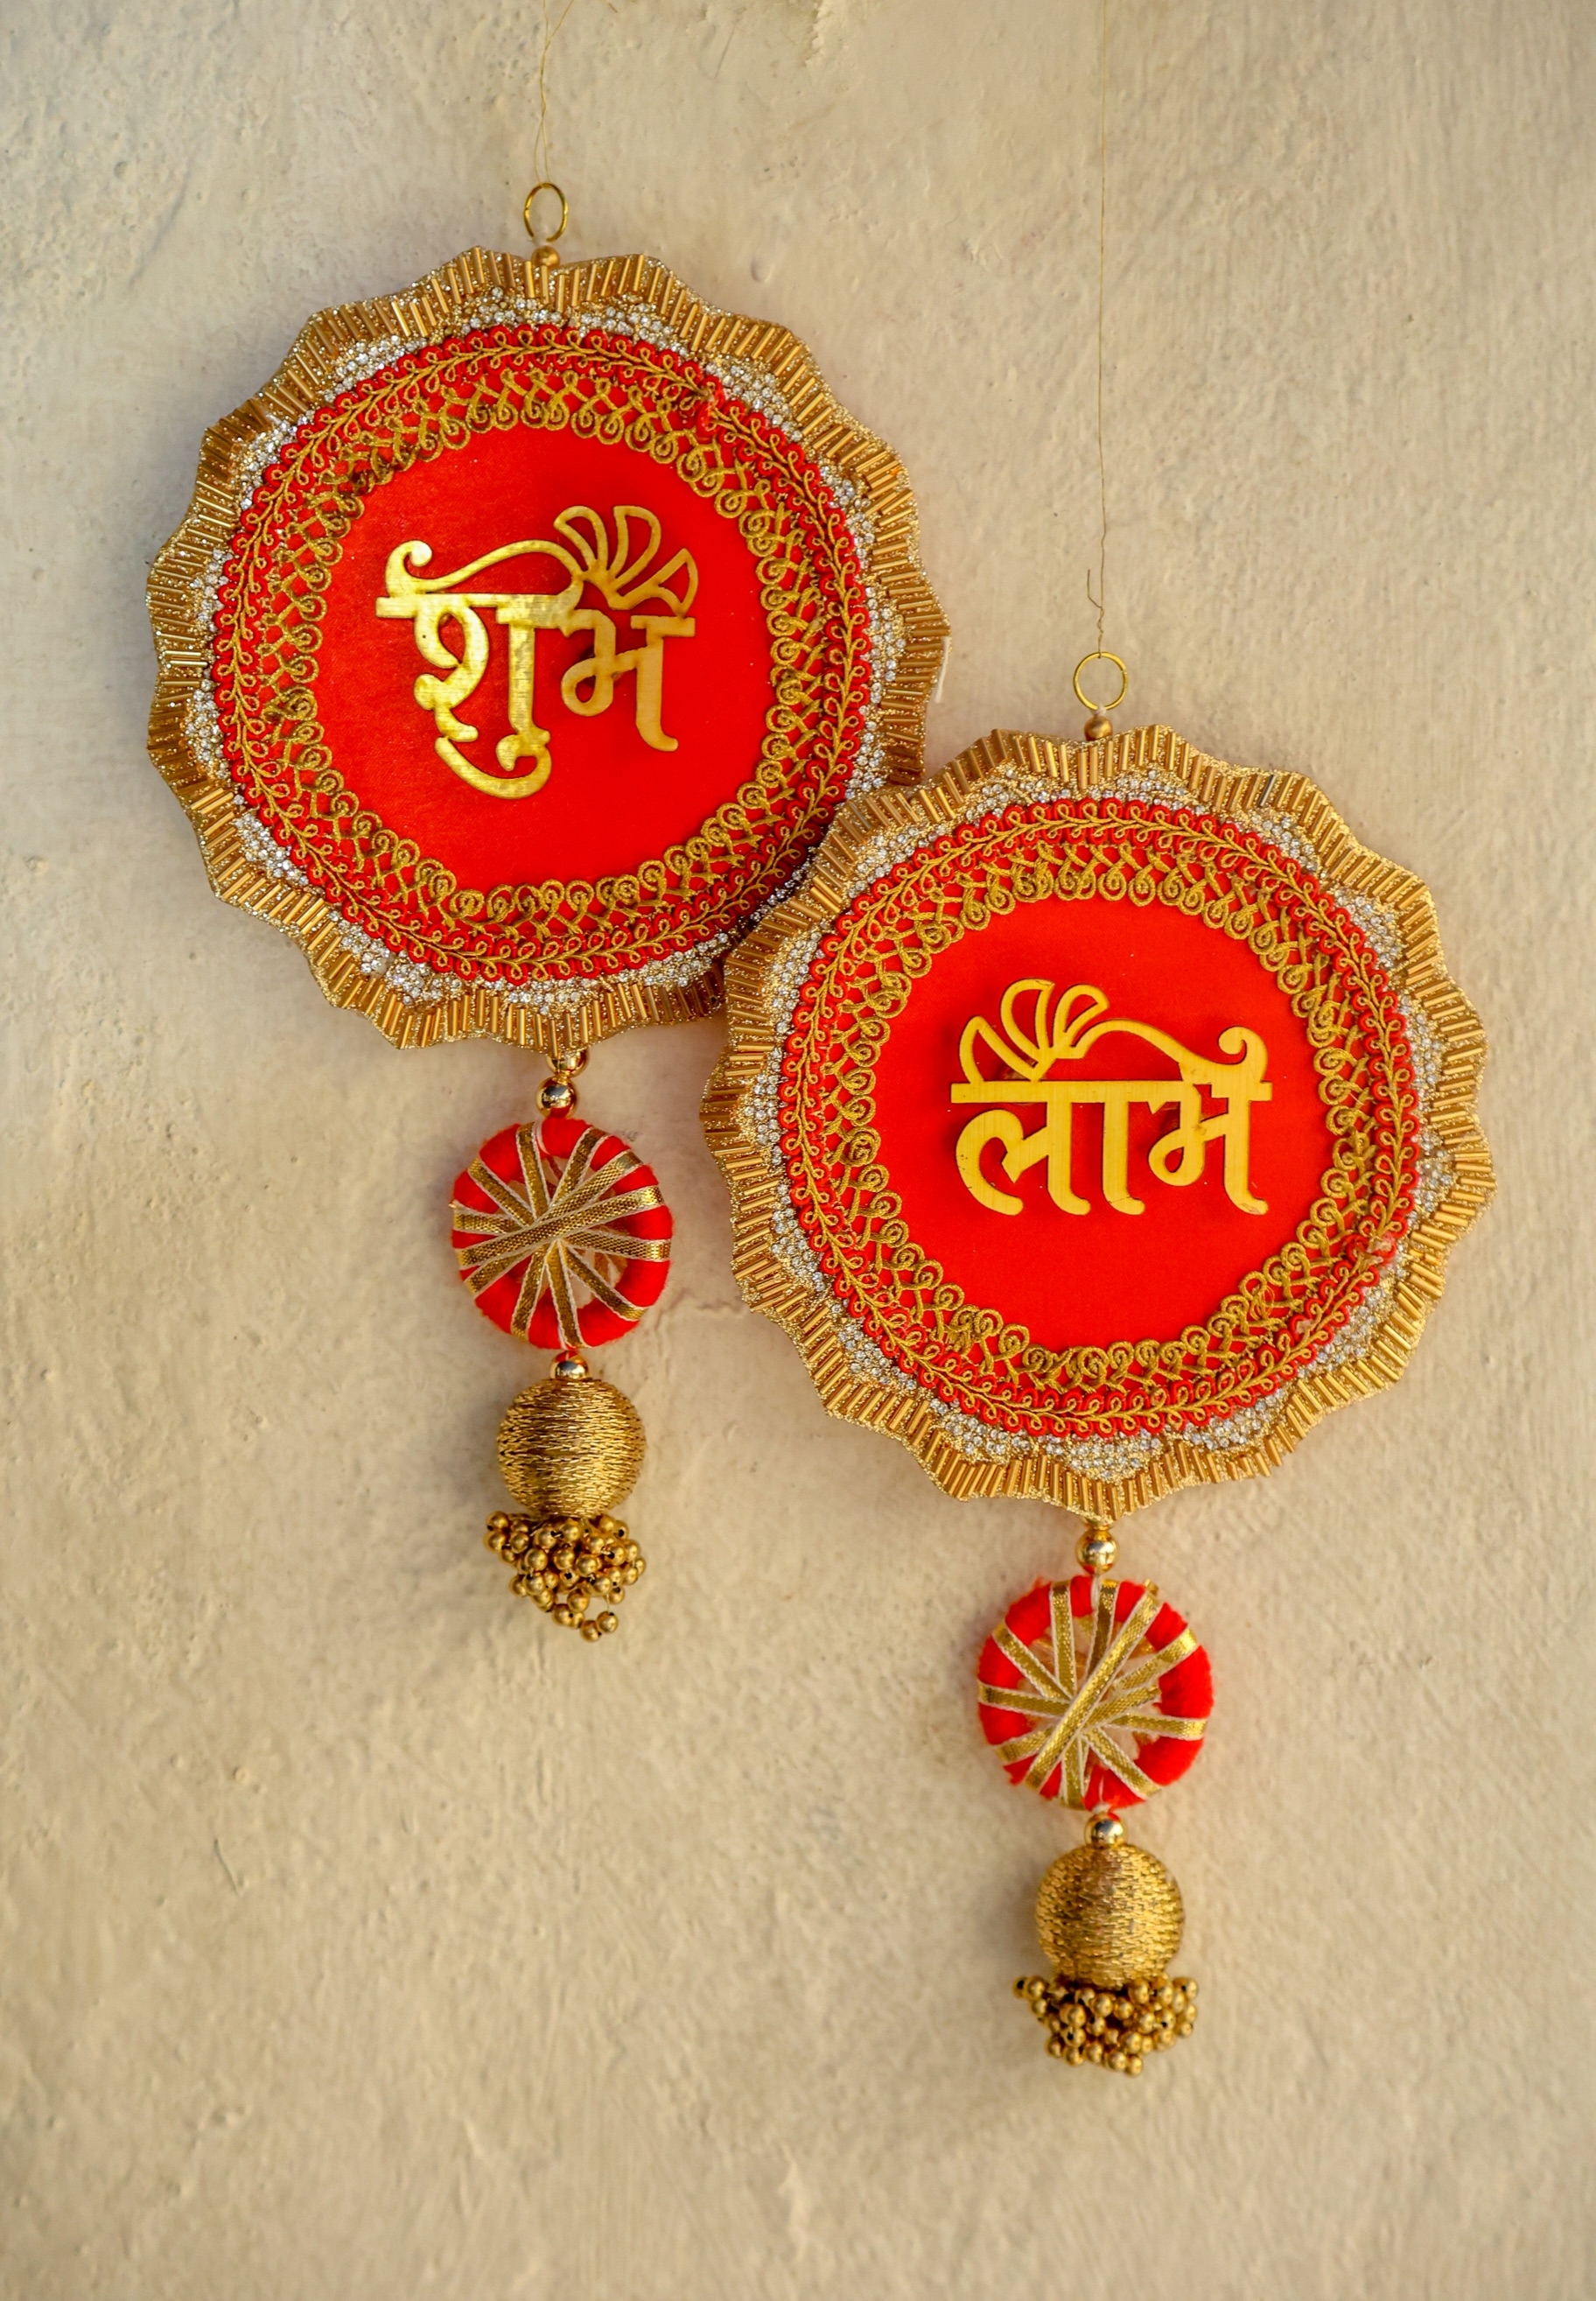 Floral art | Red Gold Subhlabh  undefined